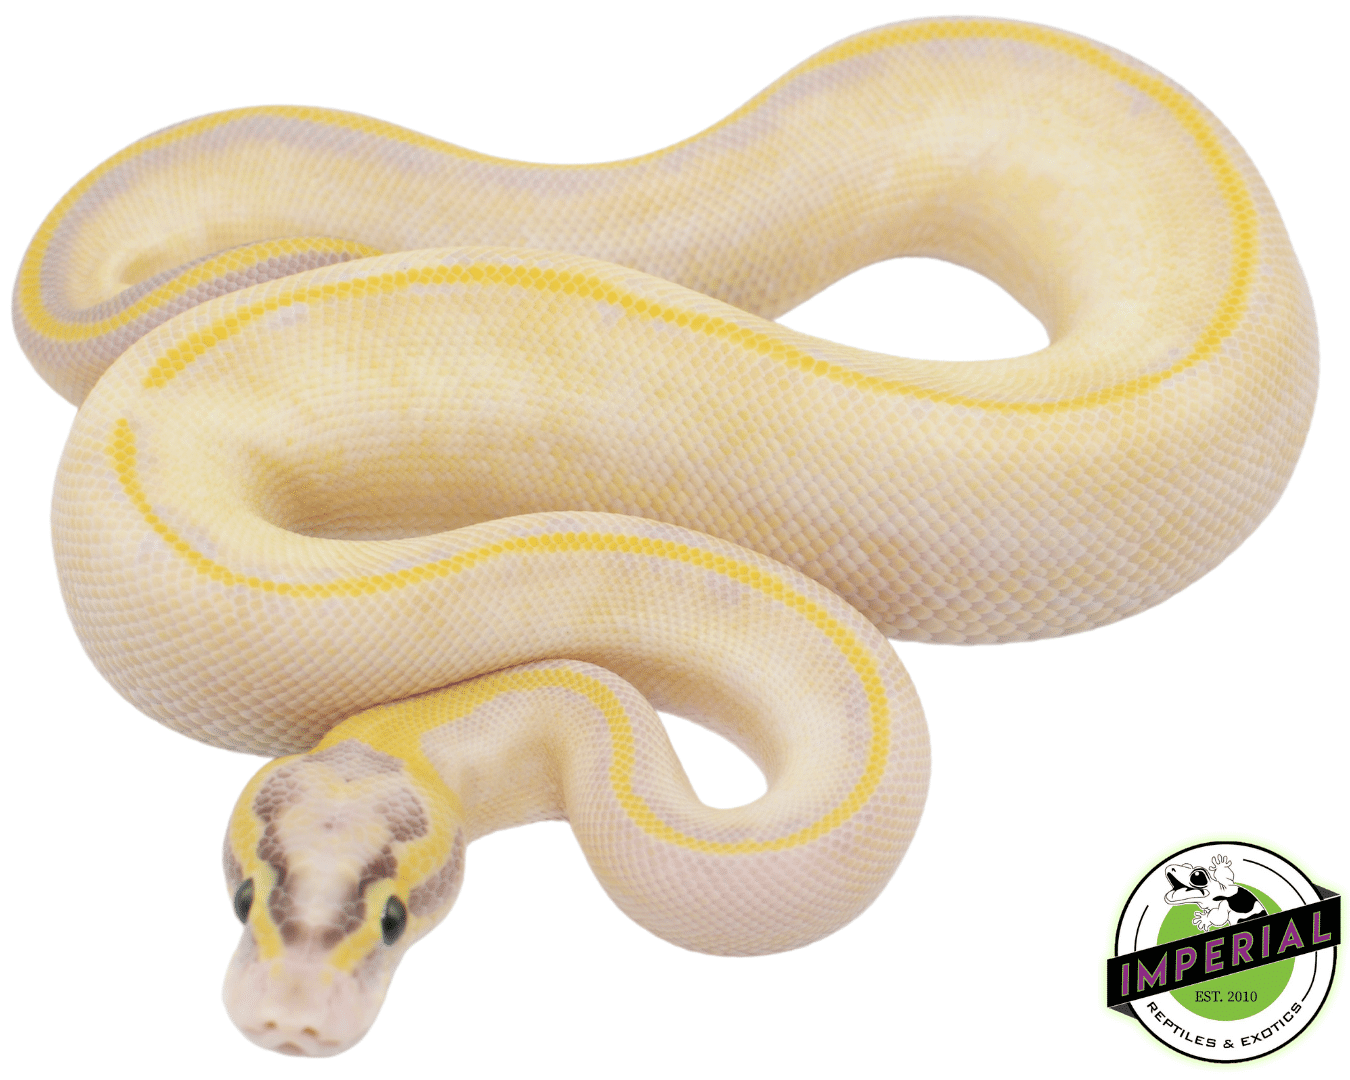 Pastel Enchi Ivory ball python for sale, buy ball pythons online at cheap prices